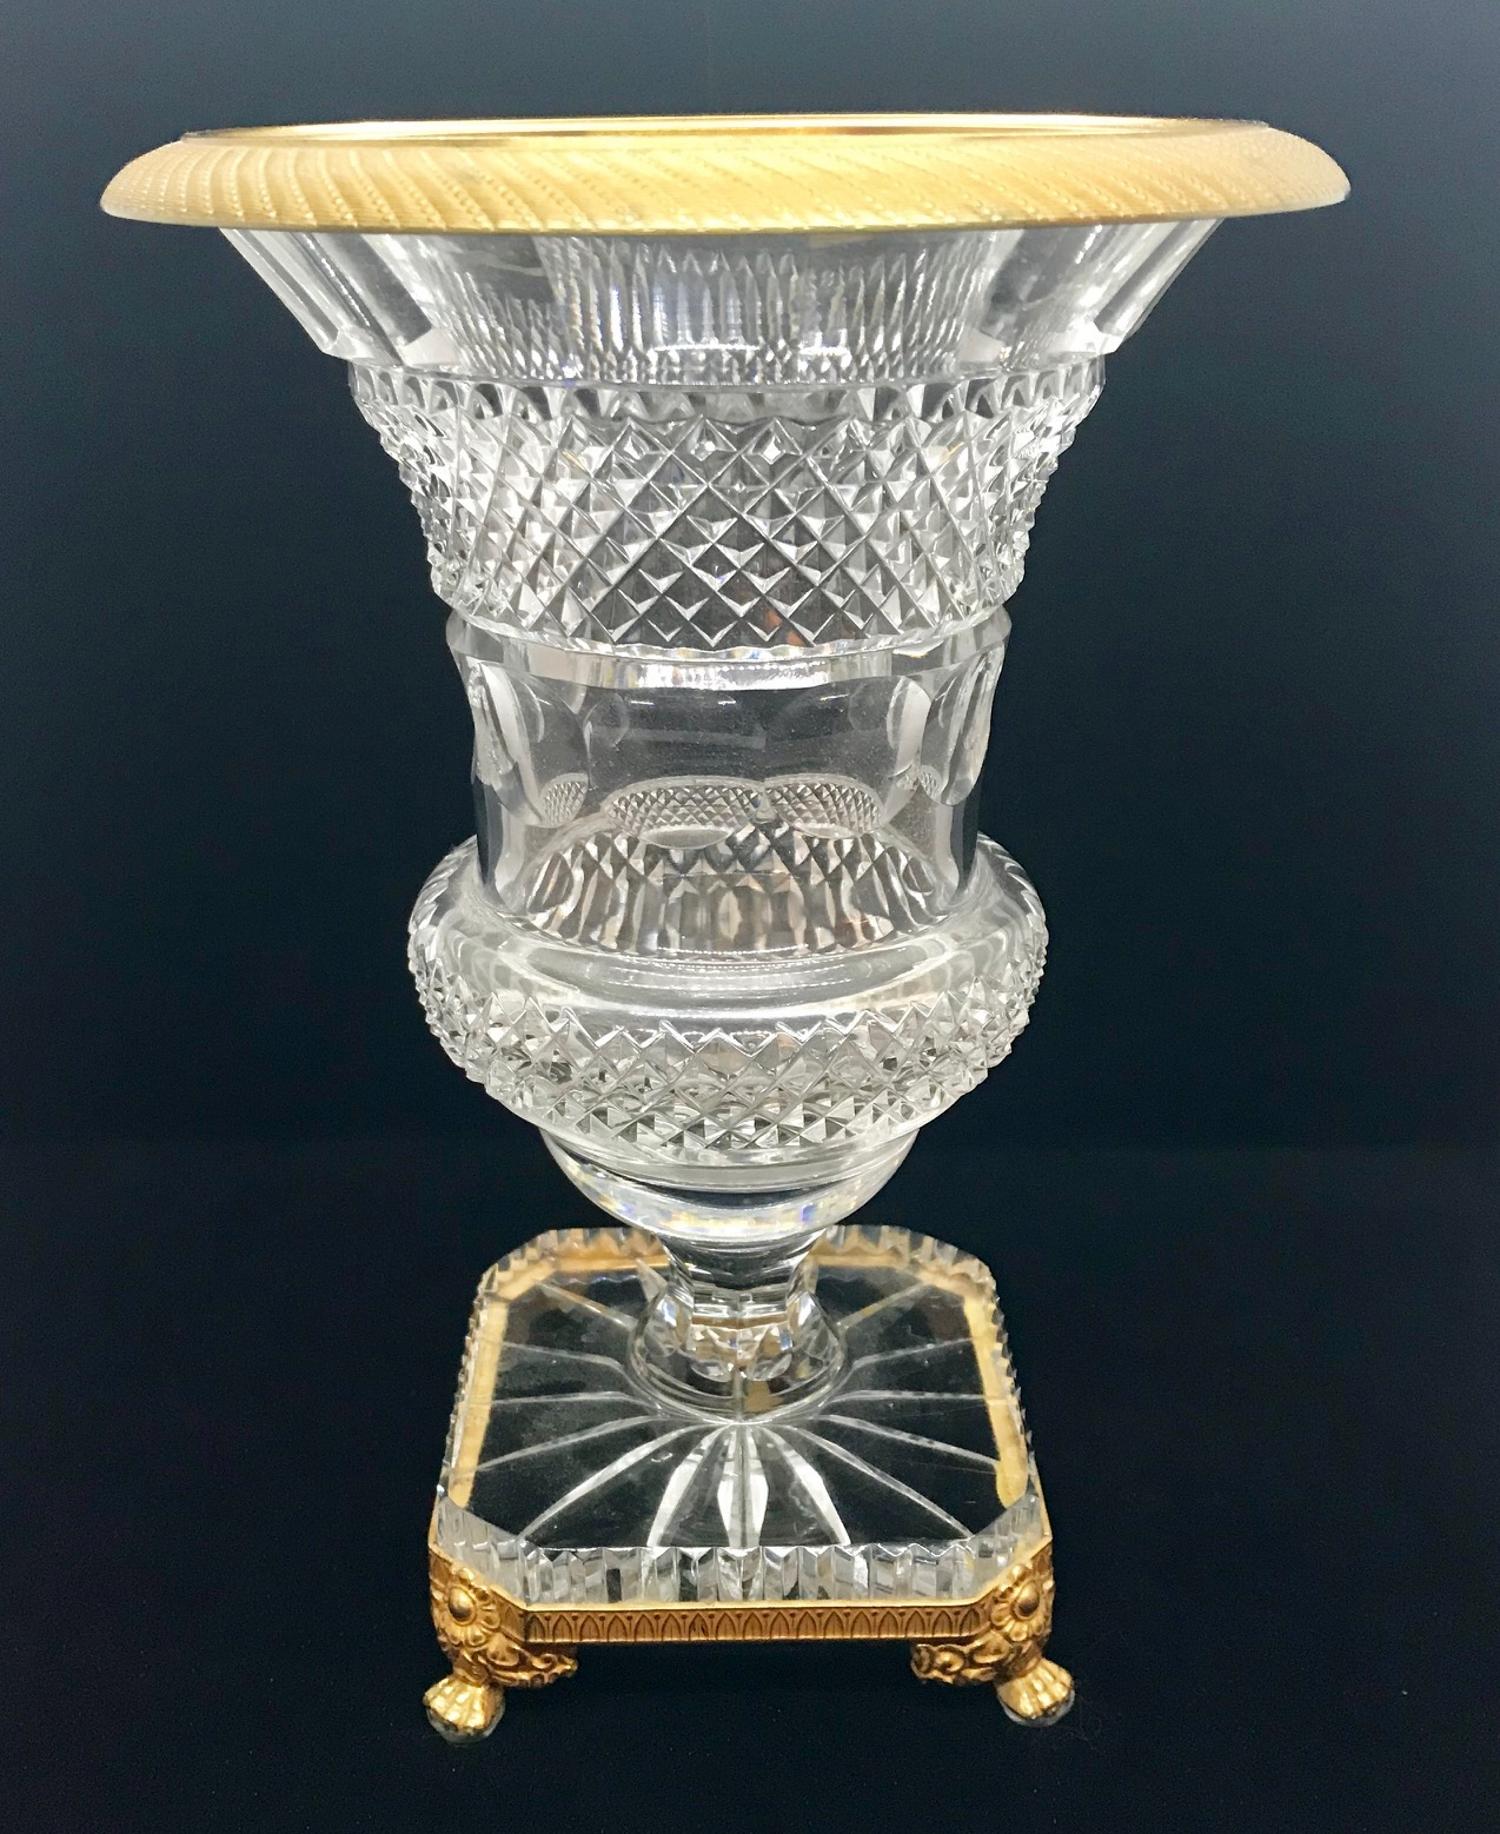 This fine cut crystal vase has a square fitted base which is bronze mounted and raised on four richly decorative feet. The ormolu rim is chased in a fine ribbon design. The baluster shaped urn is cut to perfection in round and diamond shapes.